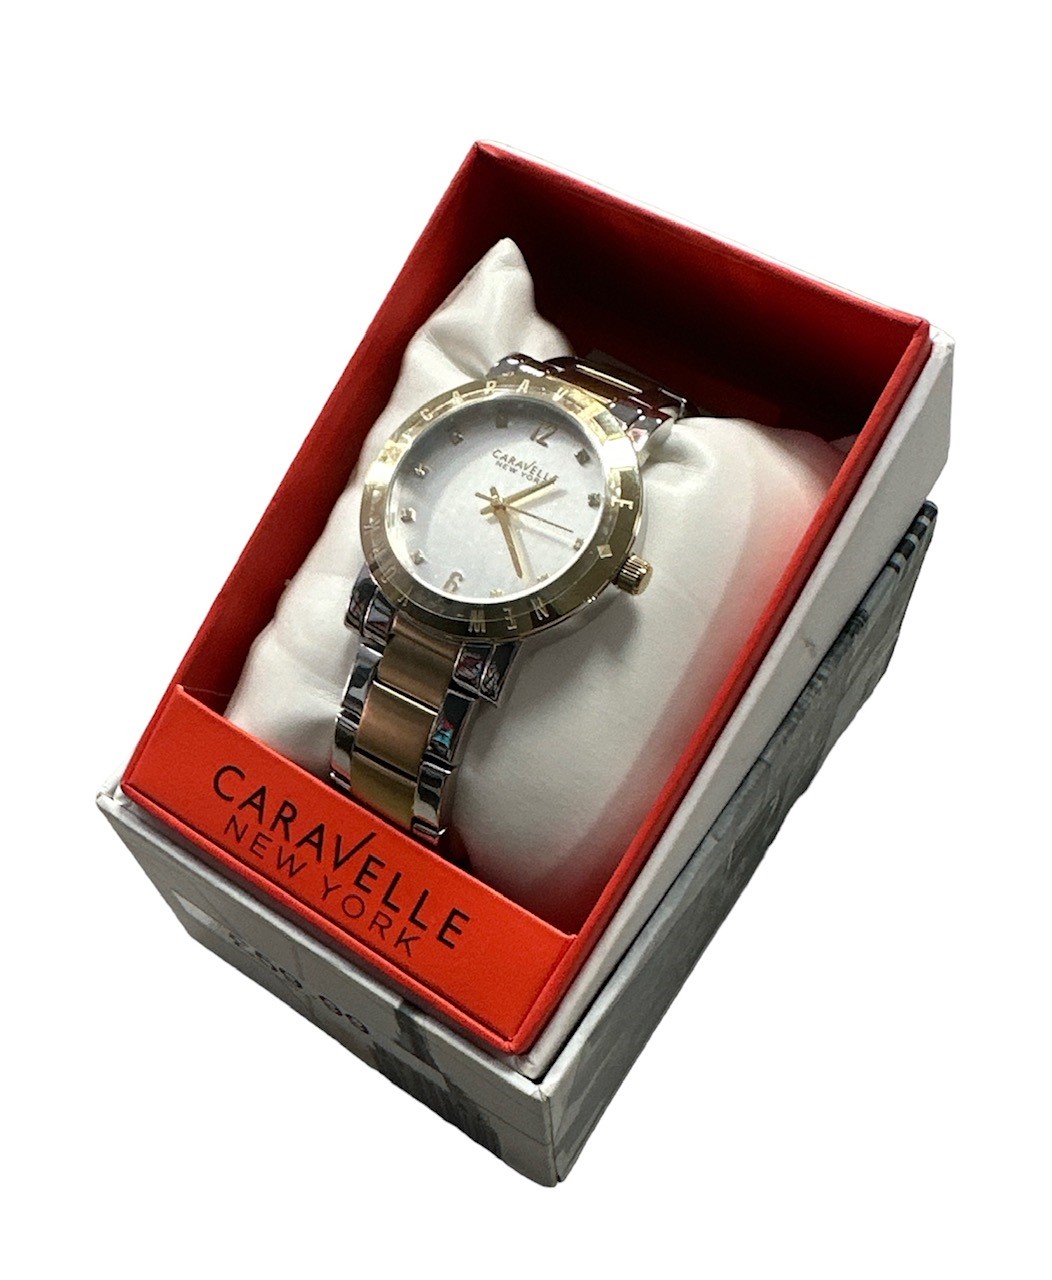 Caravelle New York Ladies Boxed Watch